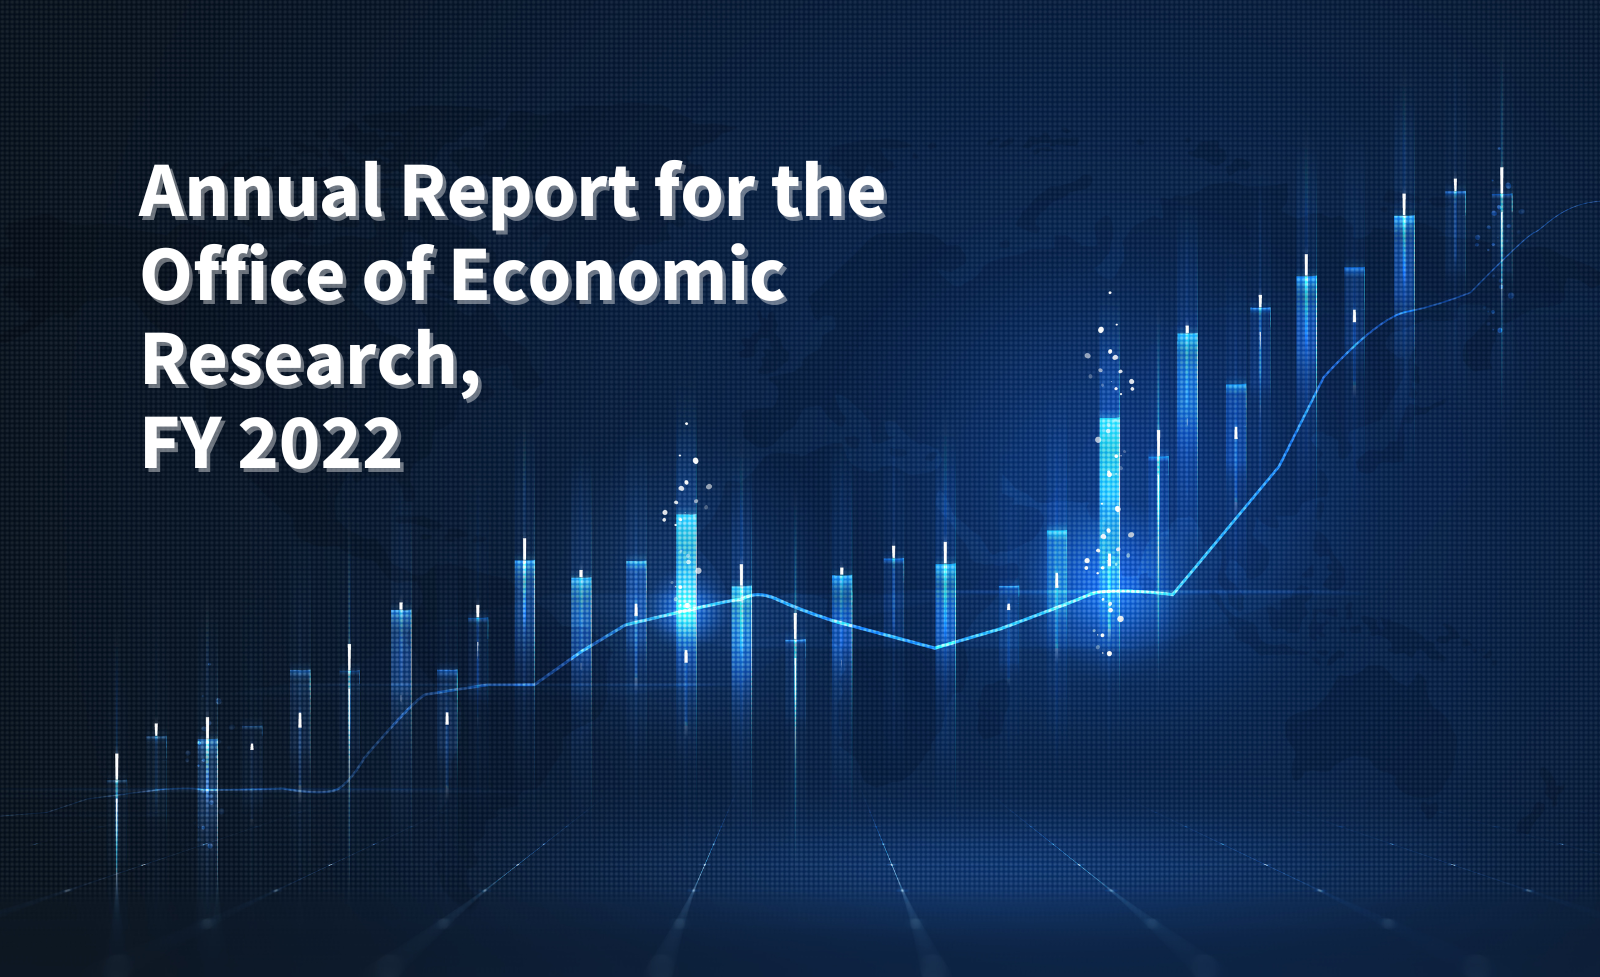 Annual Report for the Office of Economic Research, FY 2022